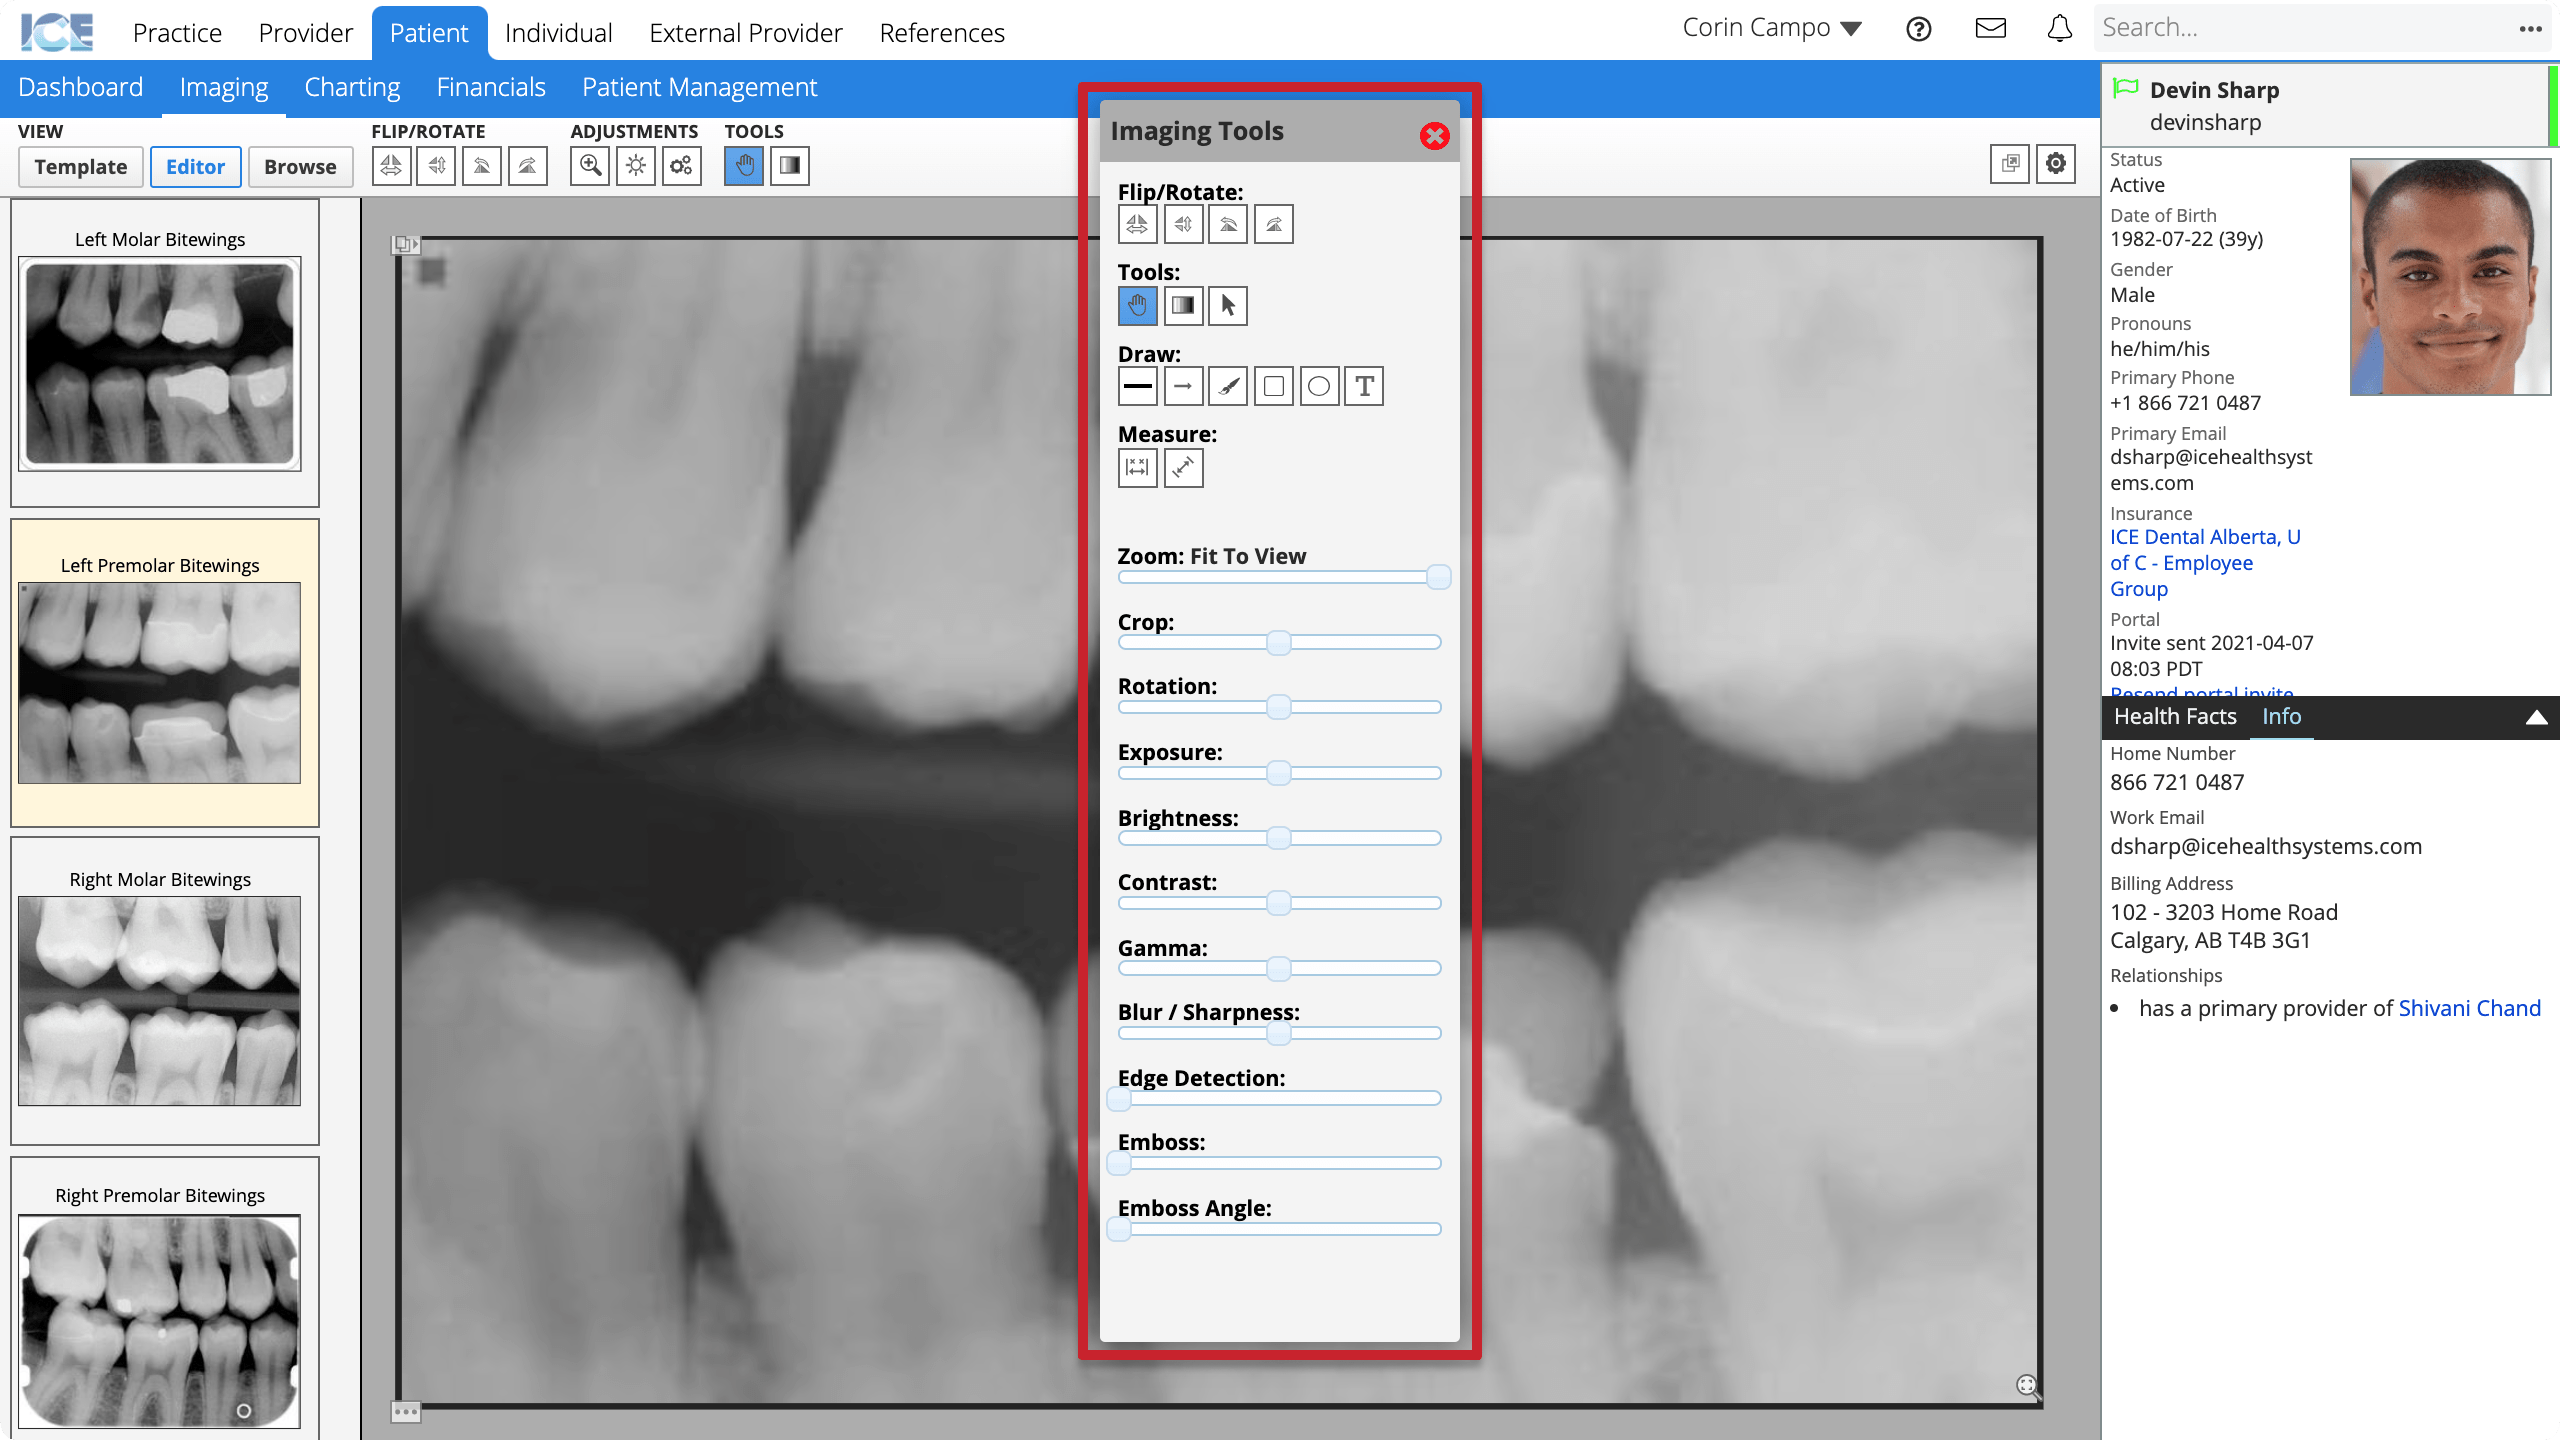 The imaging tools palette floats in the middle of the workspace.